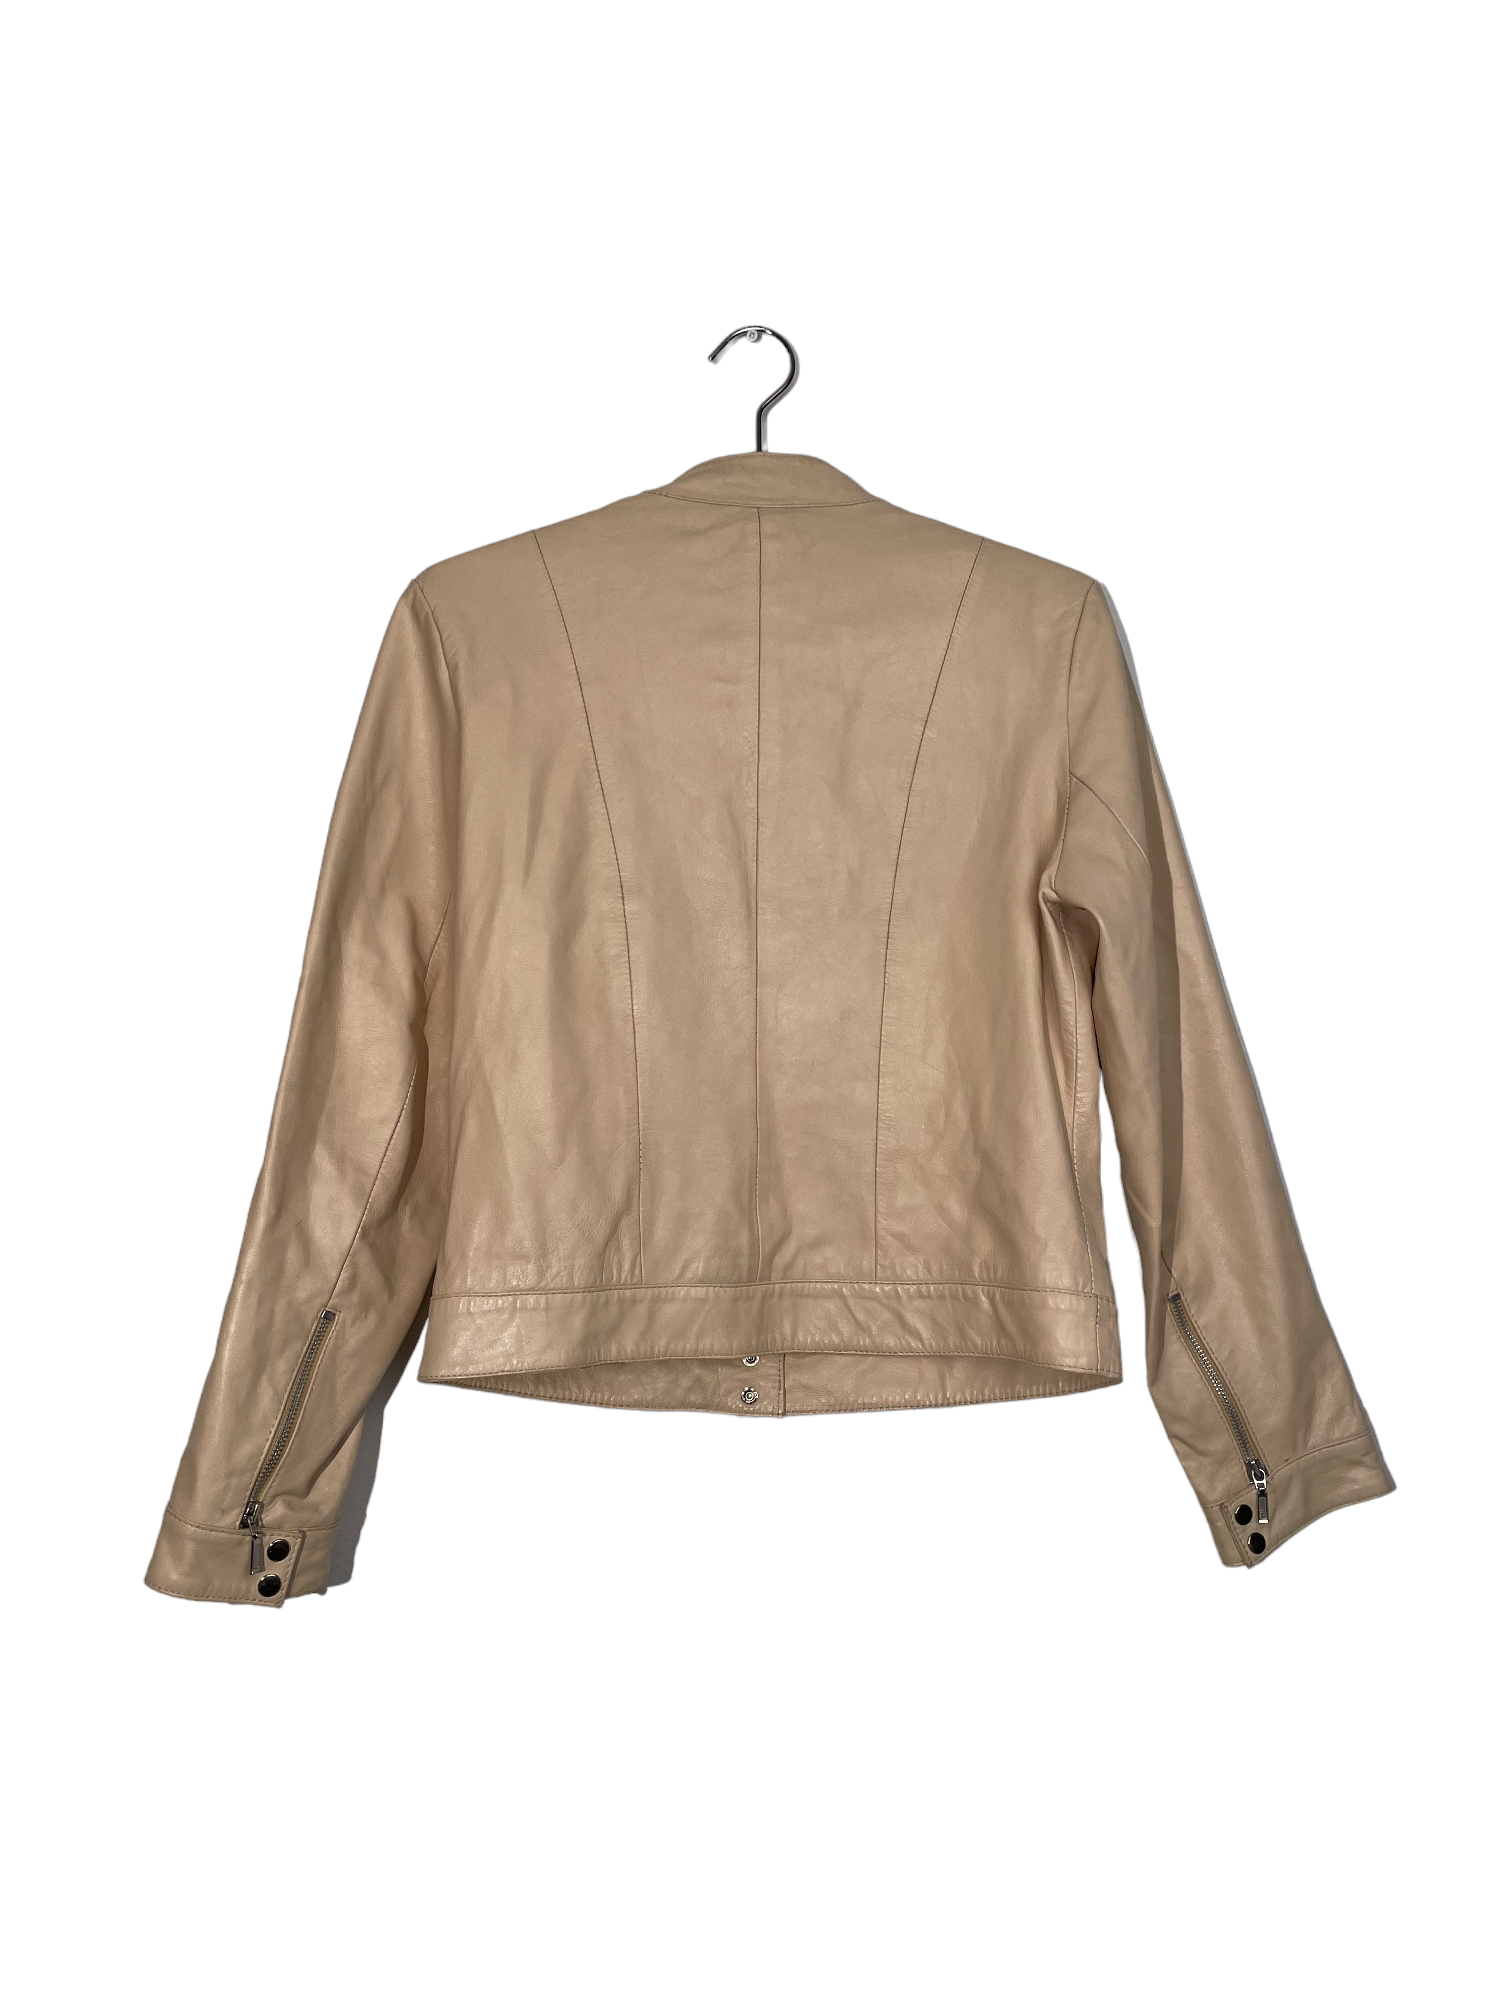 Buttery Soft Cream Leather Jacket